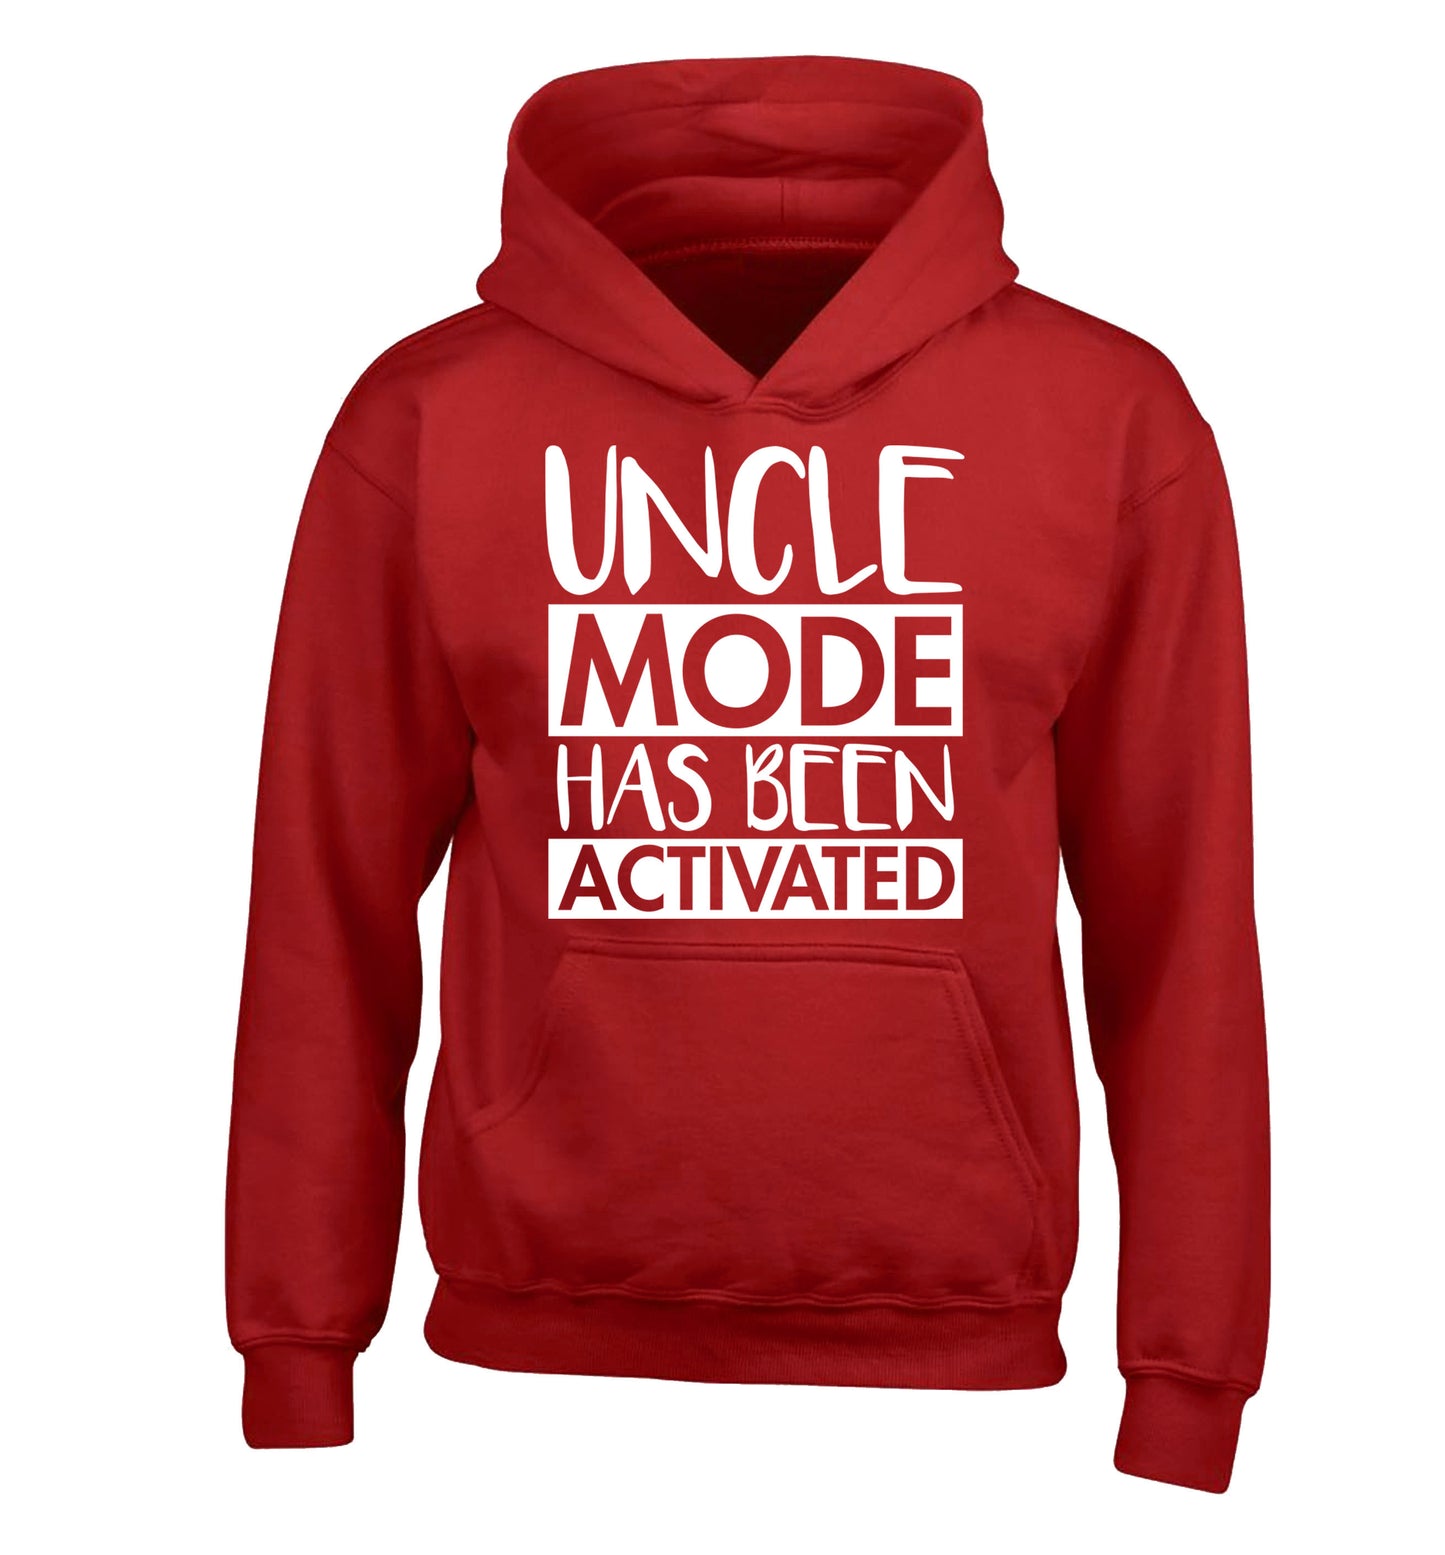 Uncle mode activated children's red hoodie 12-14 Years